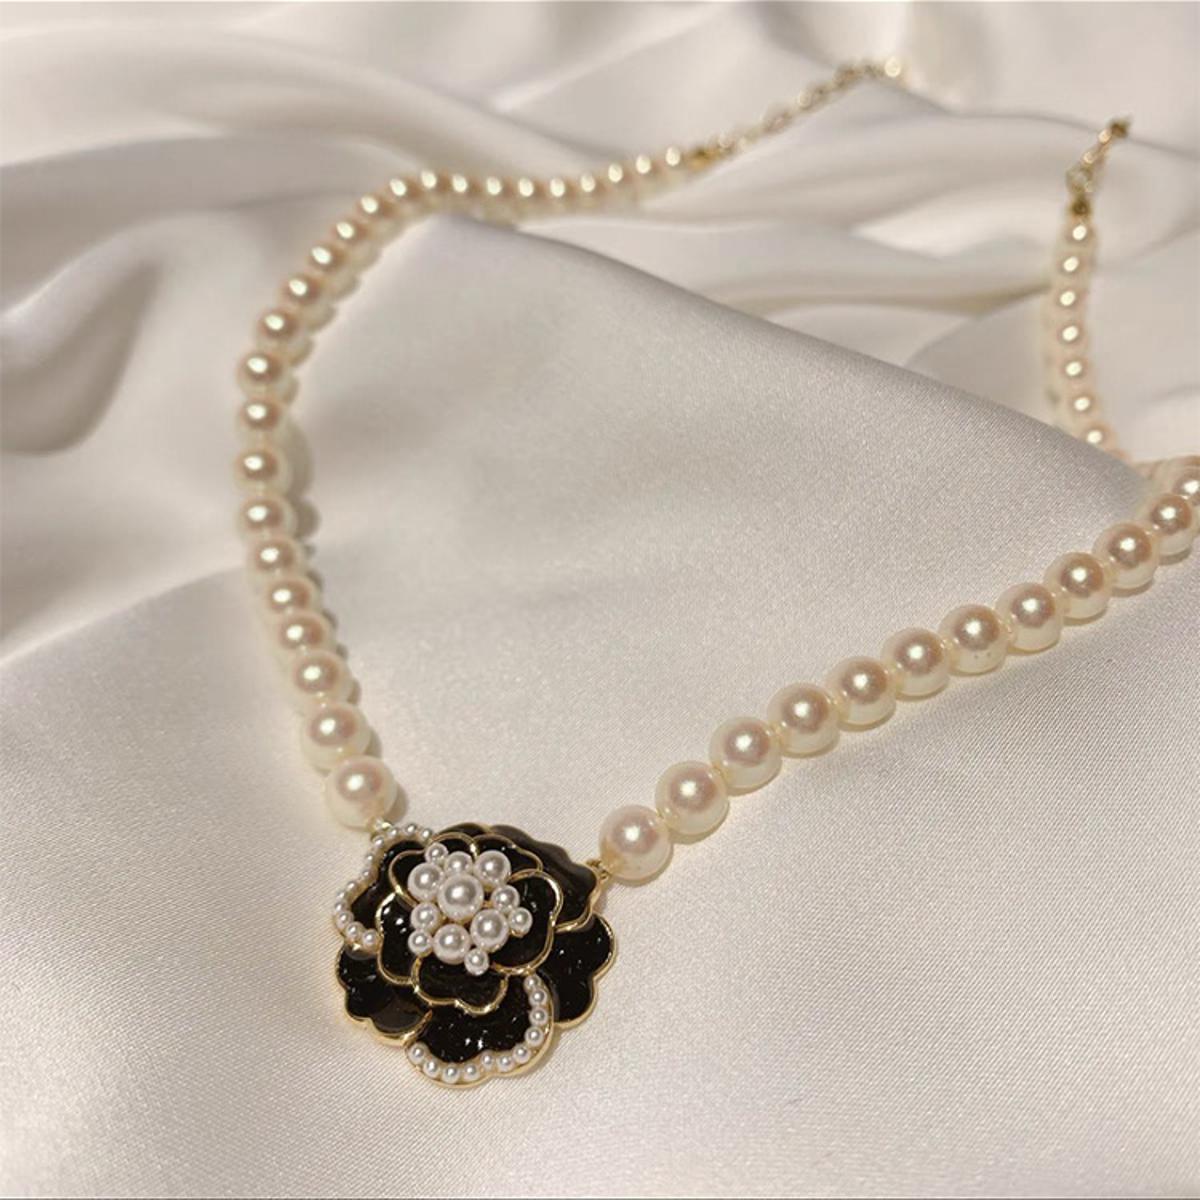 Delicate Women Camellia Pearl Necklace Pendant Flower Necklace Chocker Pearl Female Jewelry